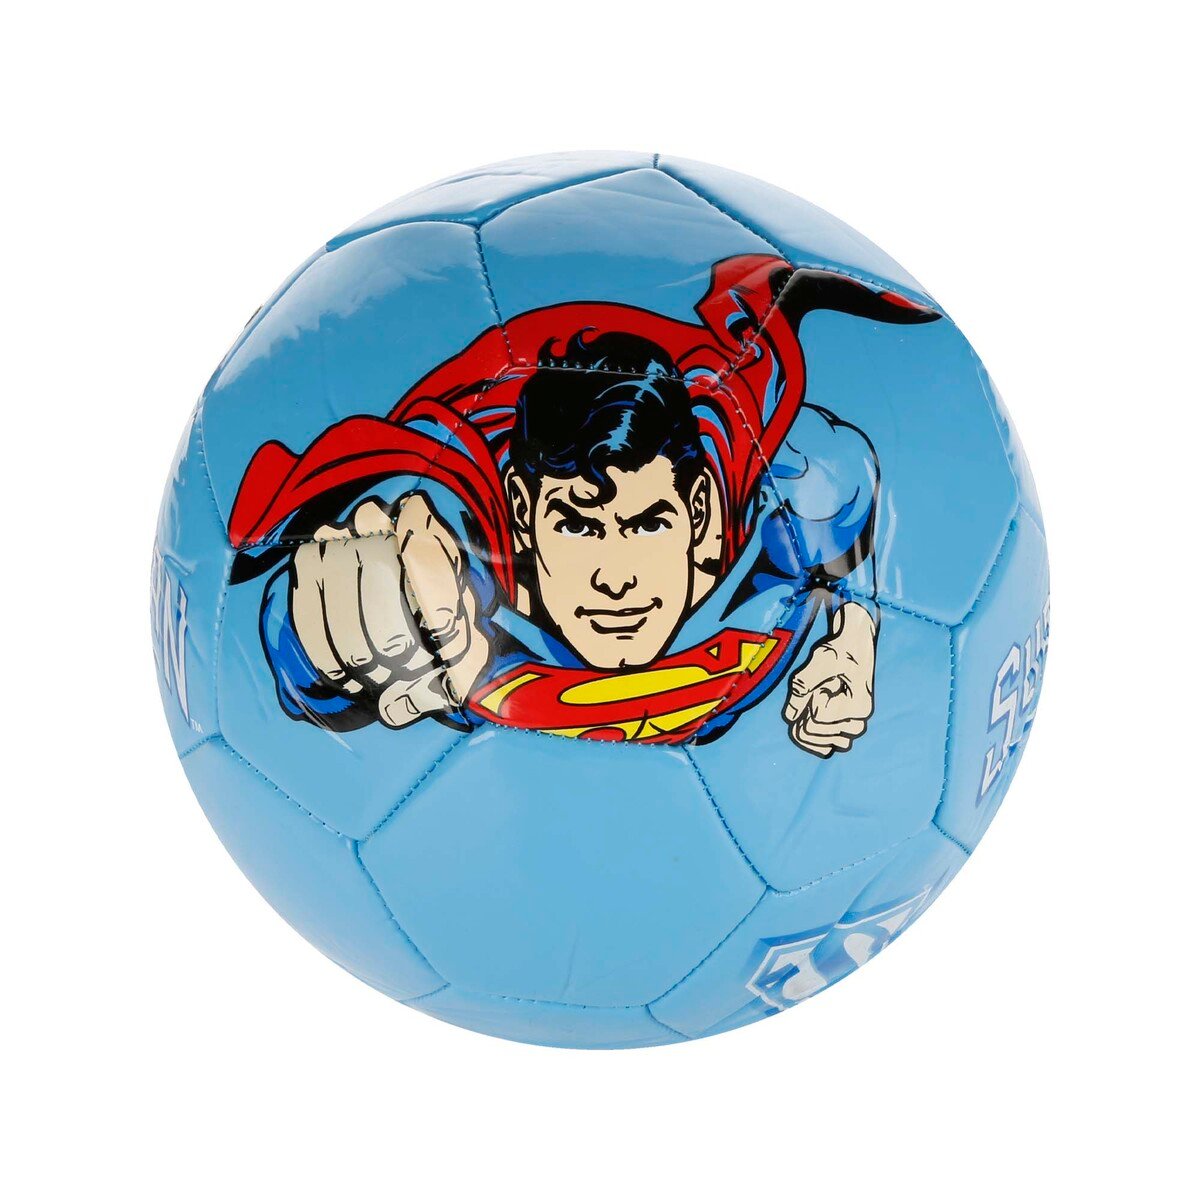 Superman Character Football Assorted Color & Design 5"